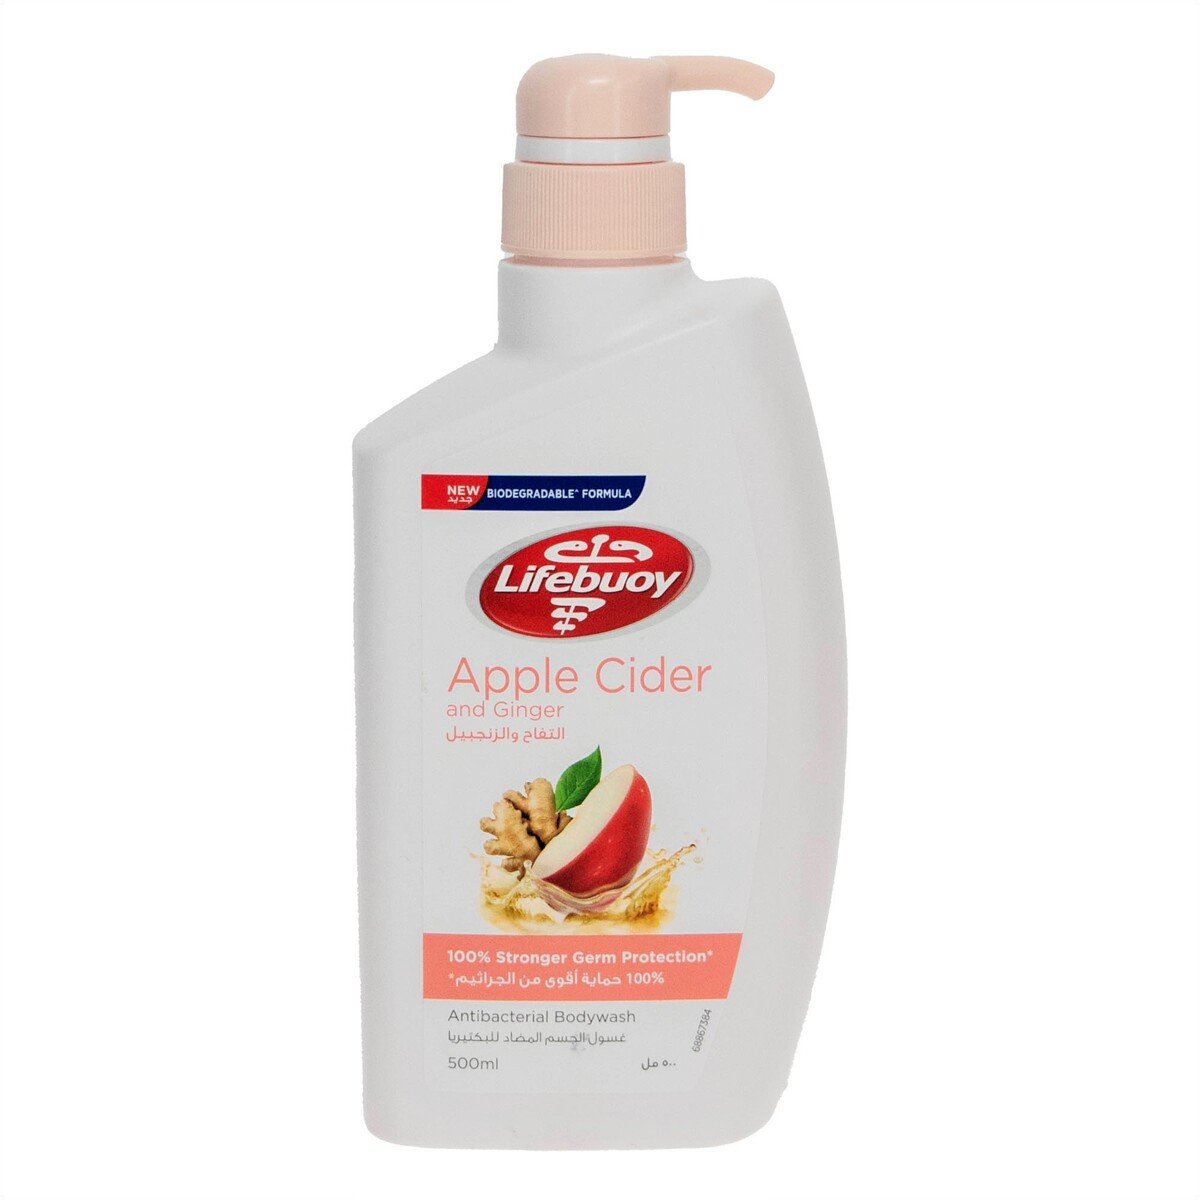 Lifebuoy Apple Cider And Ginger Antibacterial Body Wash, 500 ml